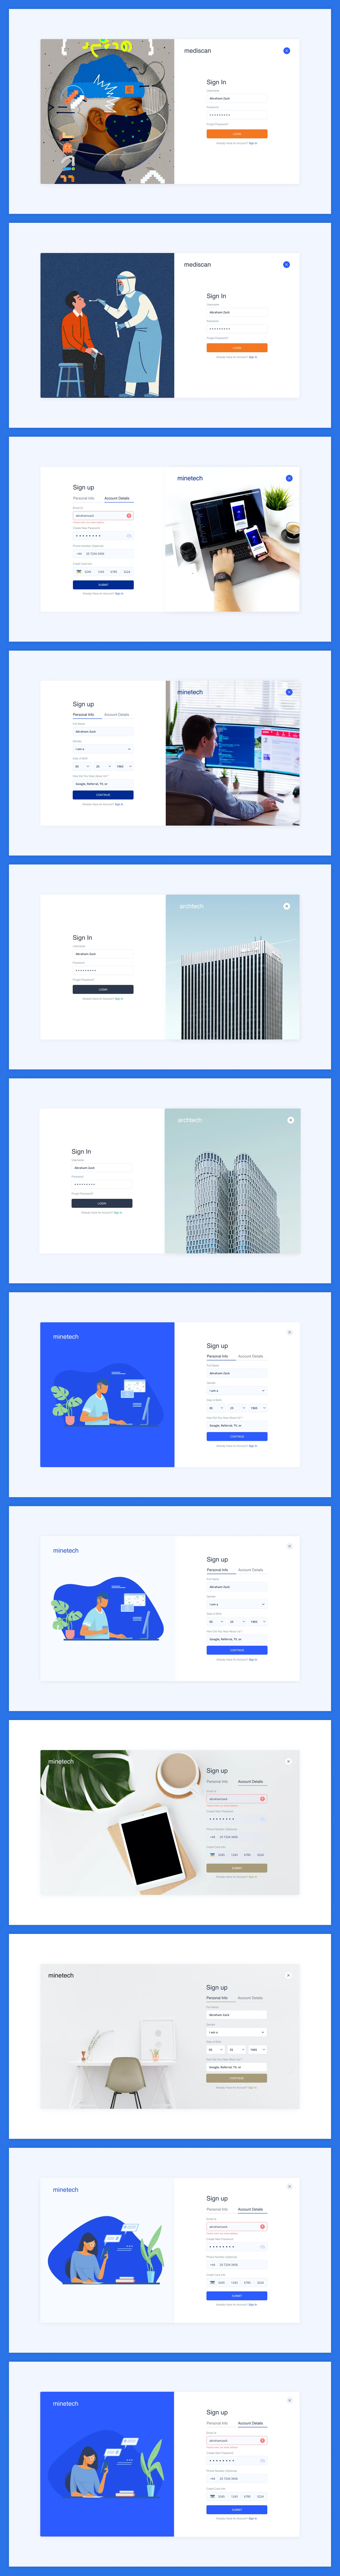 Sign Up Onboarding Free UI Kit for Adobe XD